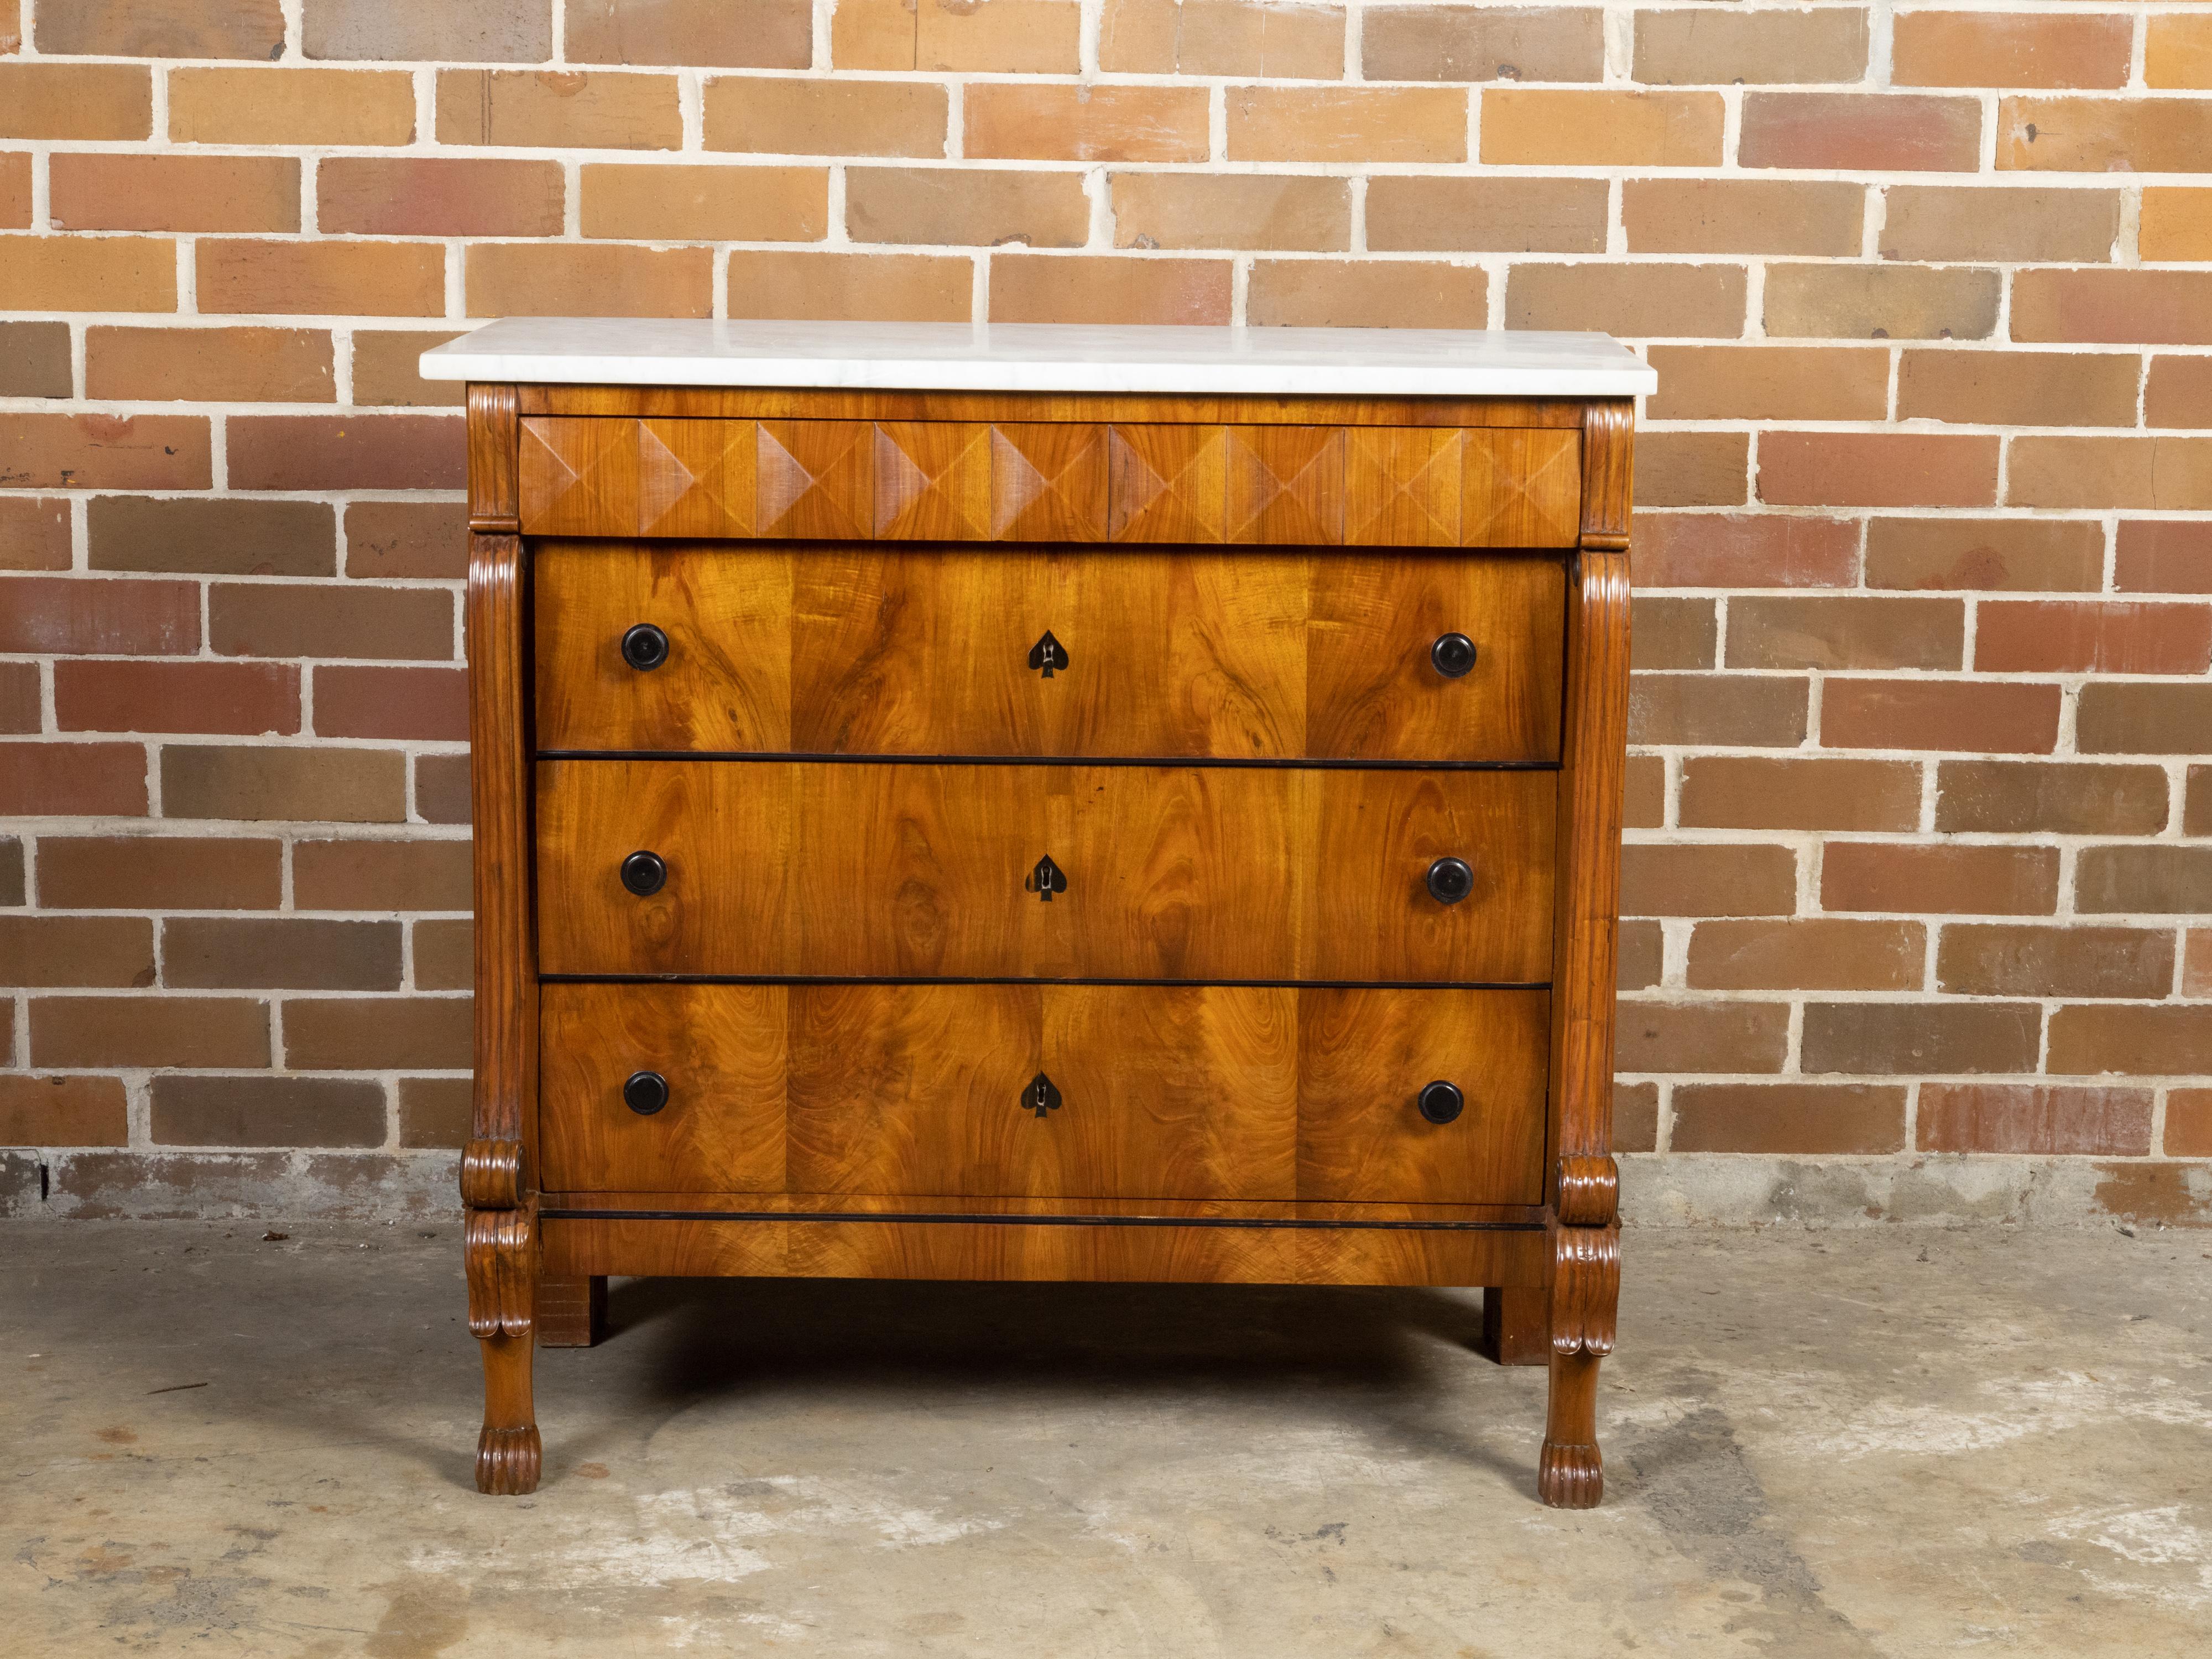 An Italian Florentine wooden commode from the 19th century, with white marble top, three drawers, volutes, paw feet and ebonized accents. Created in Florence during the 19th century, this commode features a rectangular white marble top sitting above